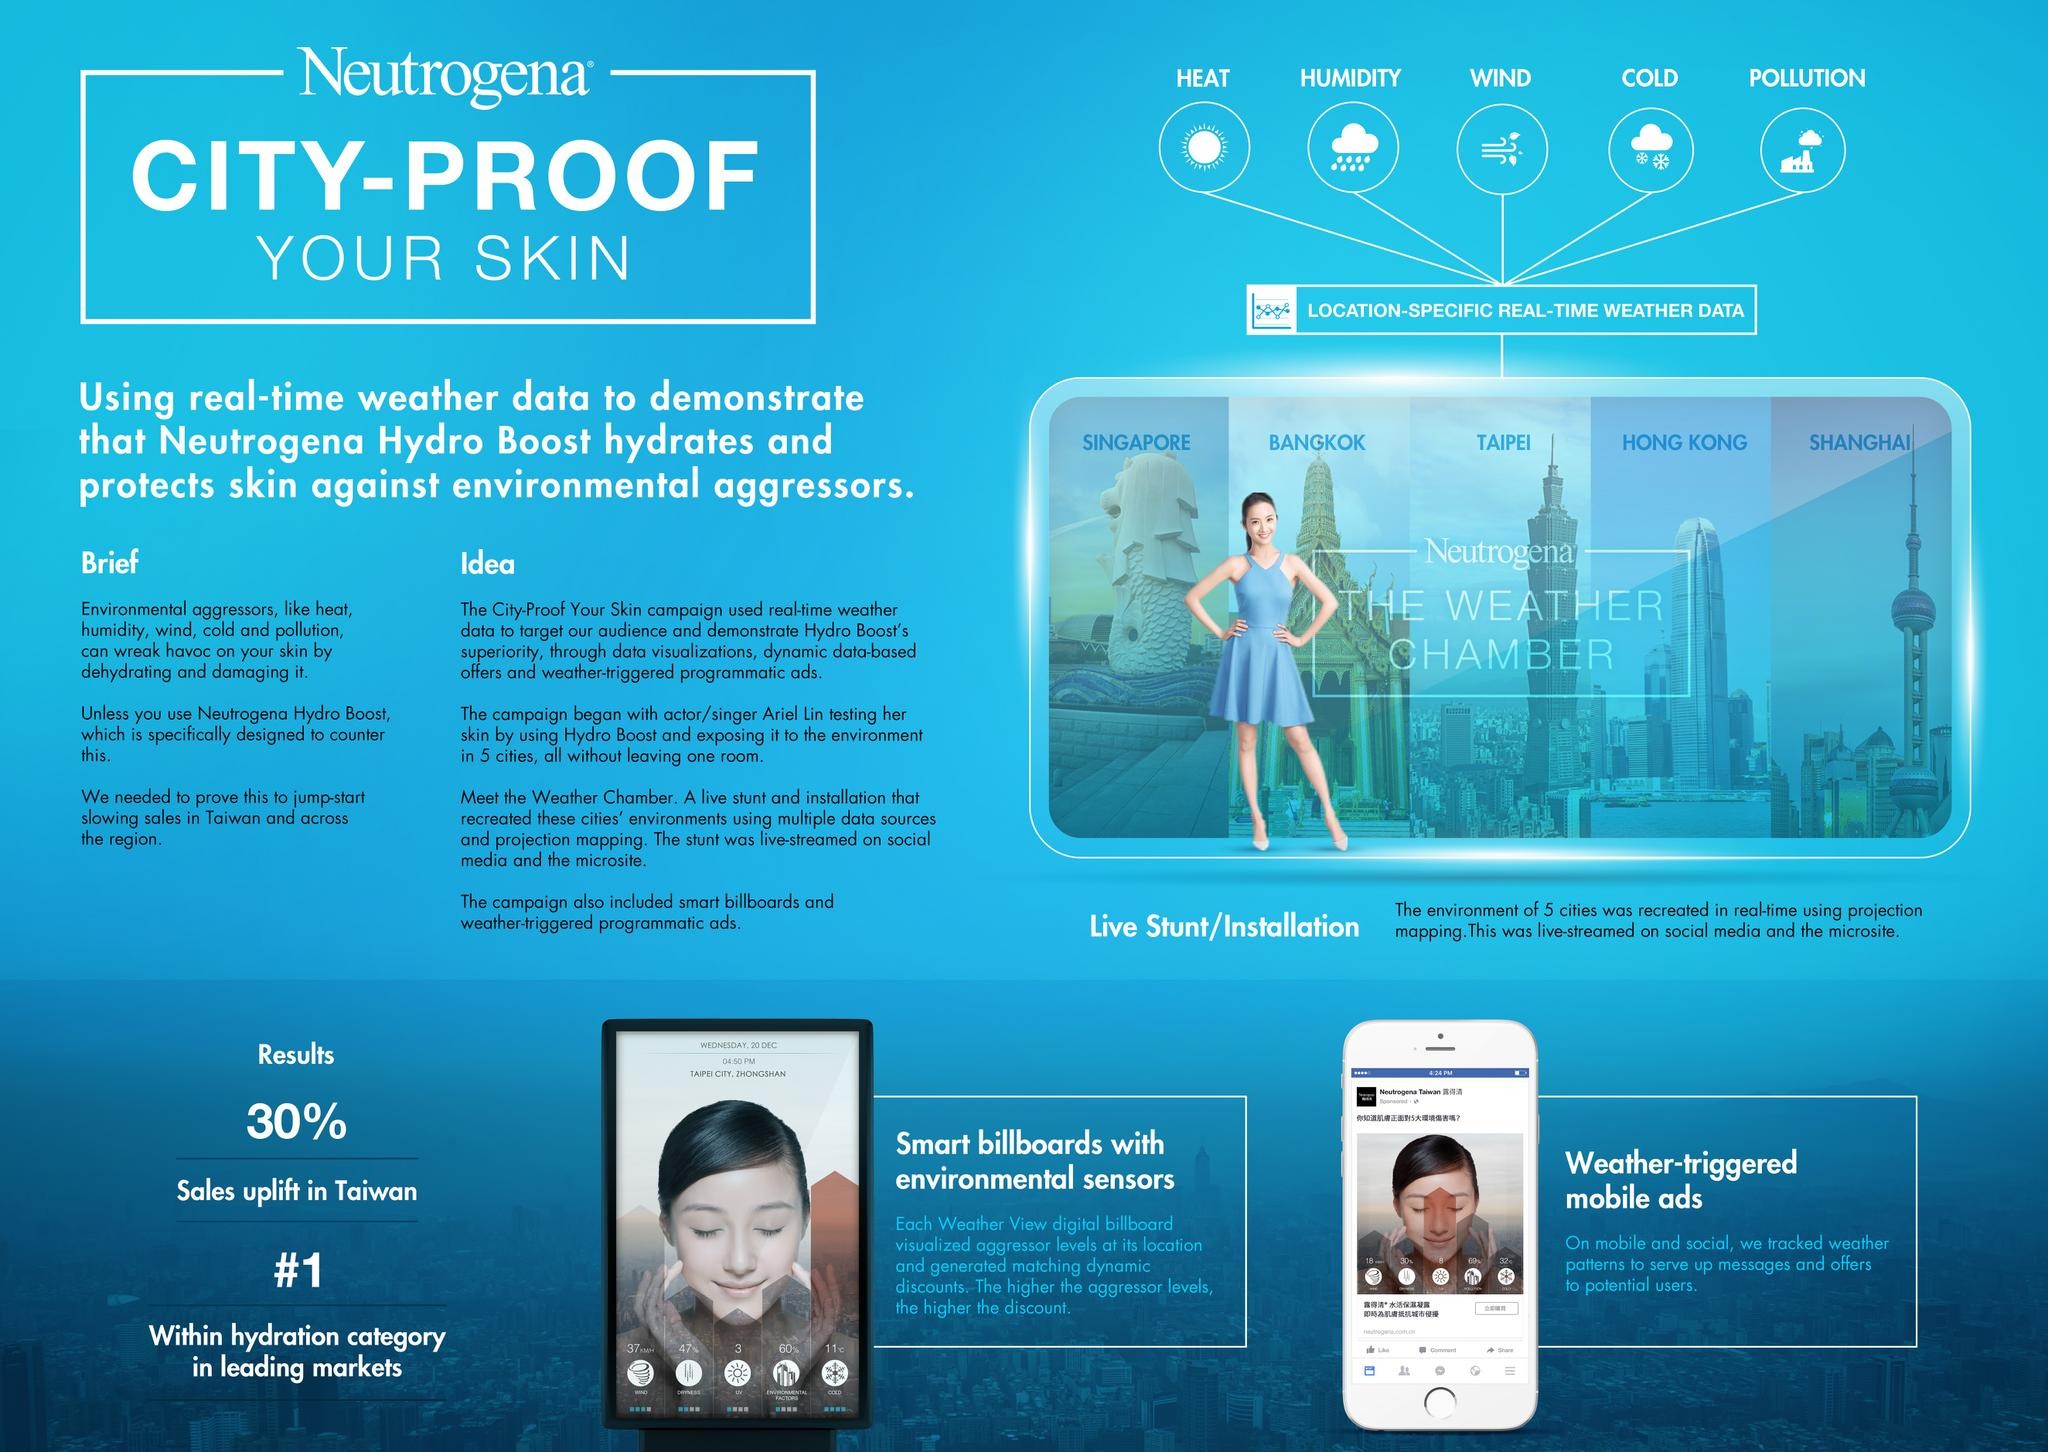 CITY-PROOF YOUR SKIN